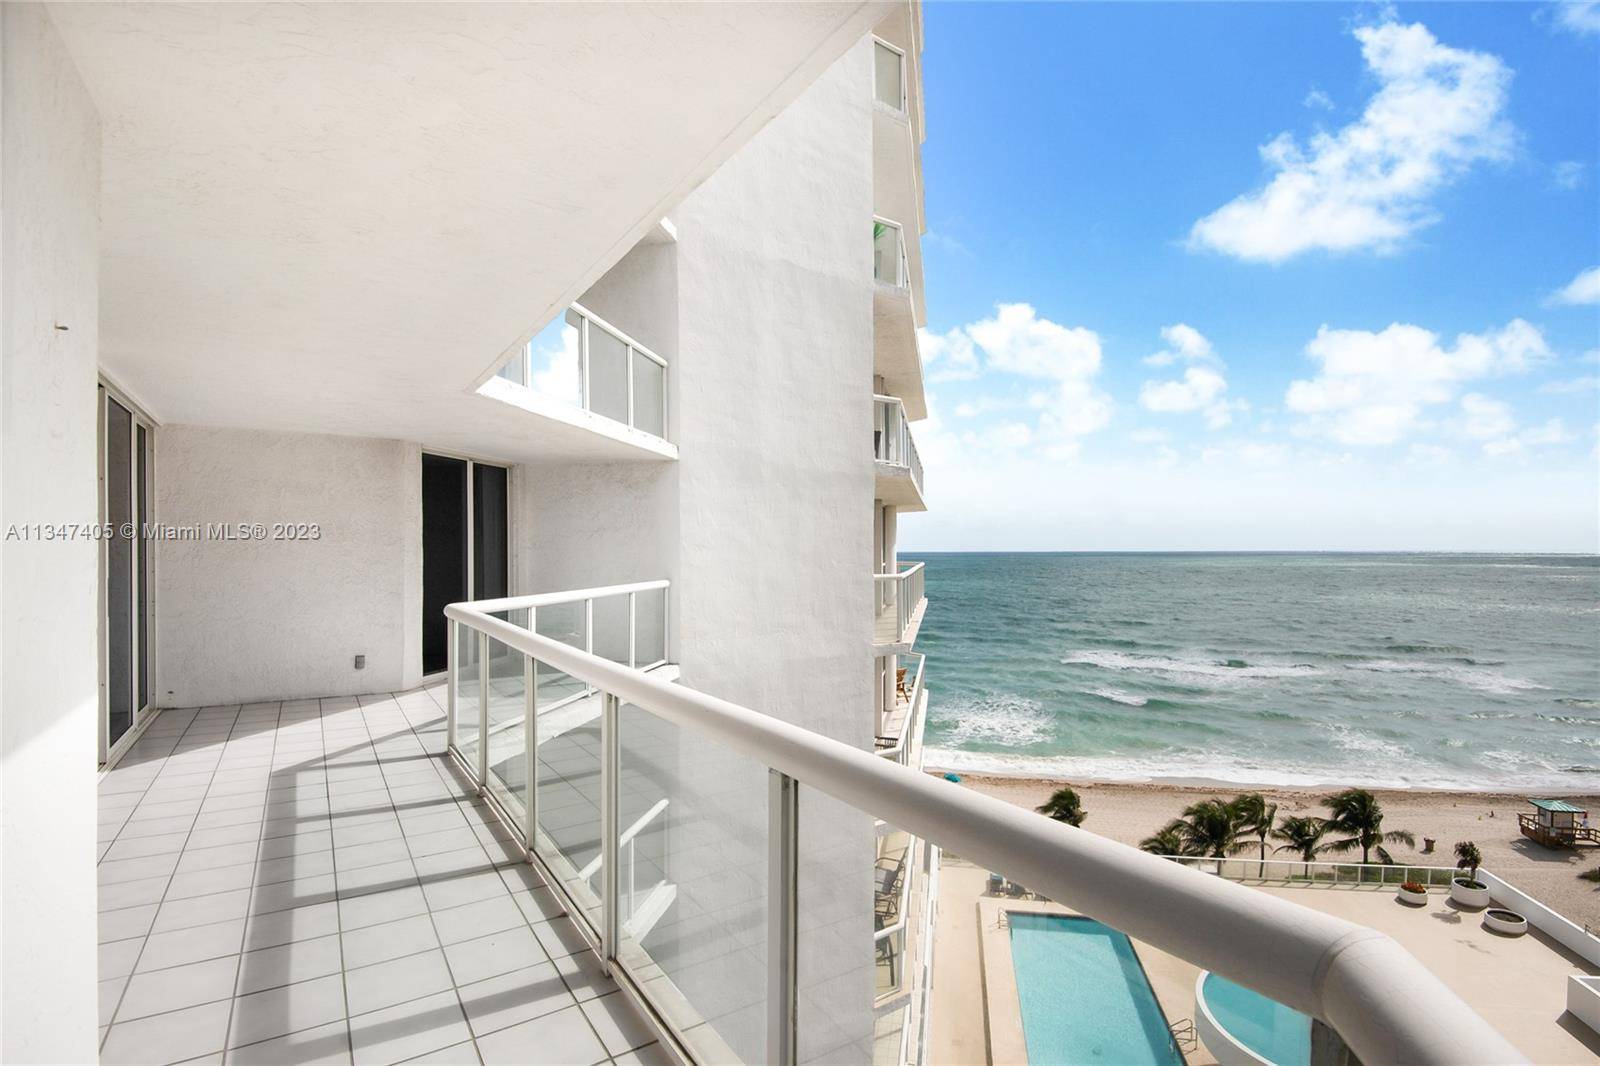 Experience the ultimate resort lifestyle in this 2 bed 2 bath apartment with breathtaking ocean views, located in the heart of Sunny Isles Beach.